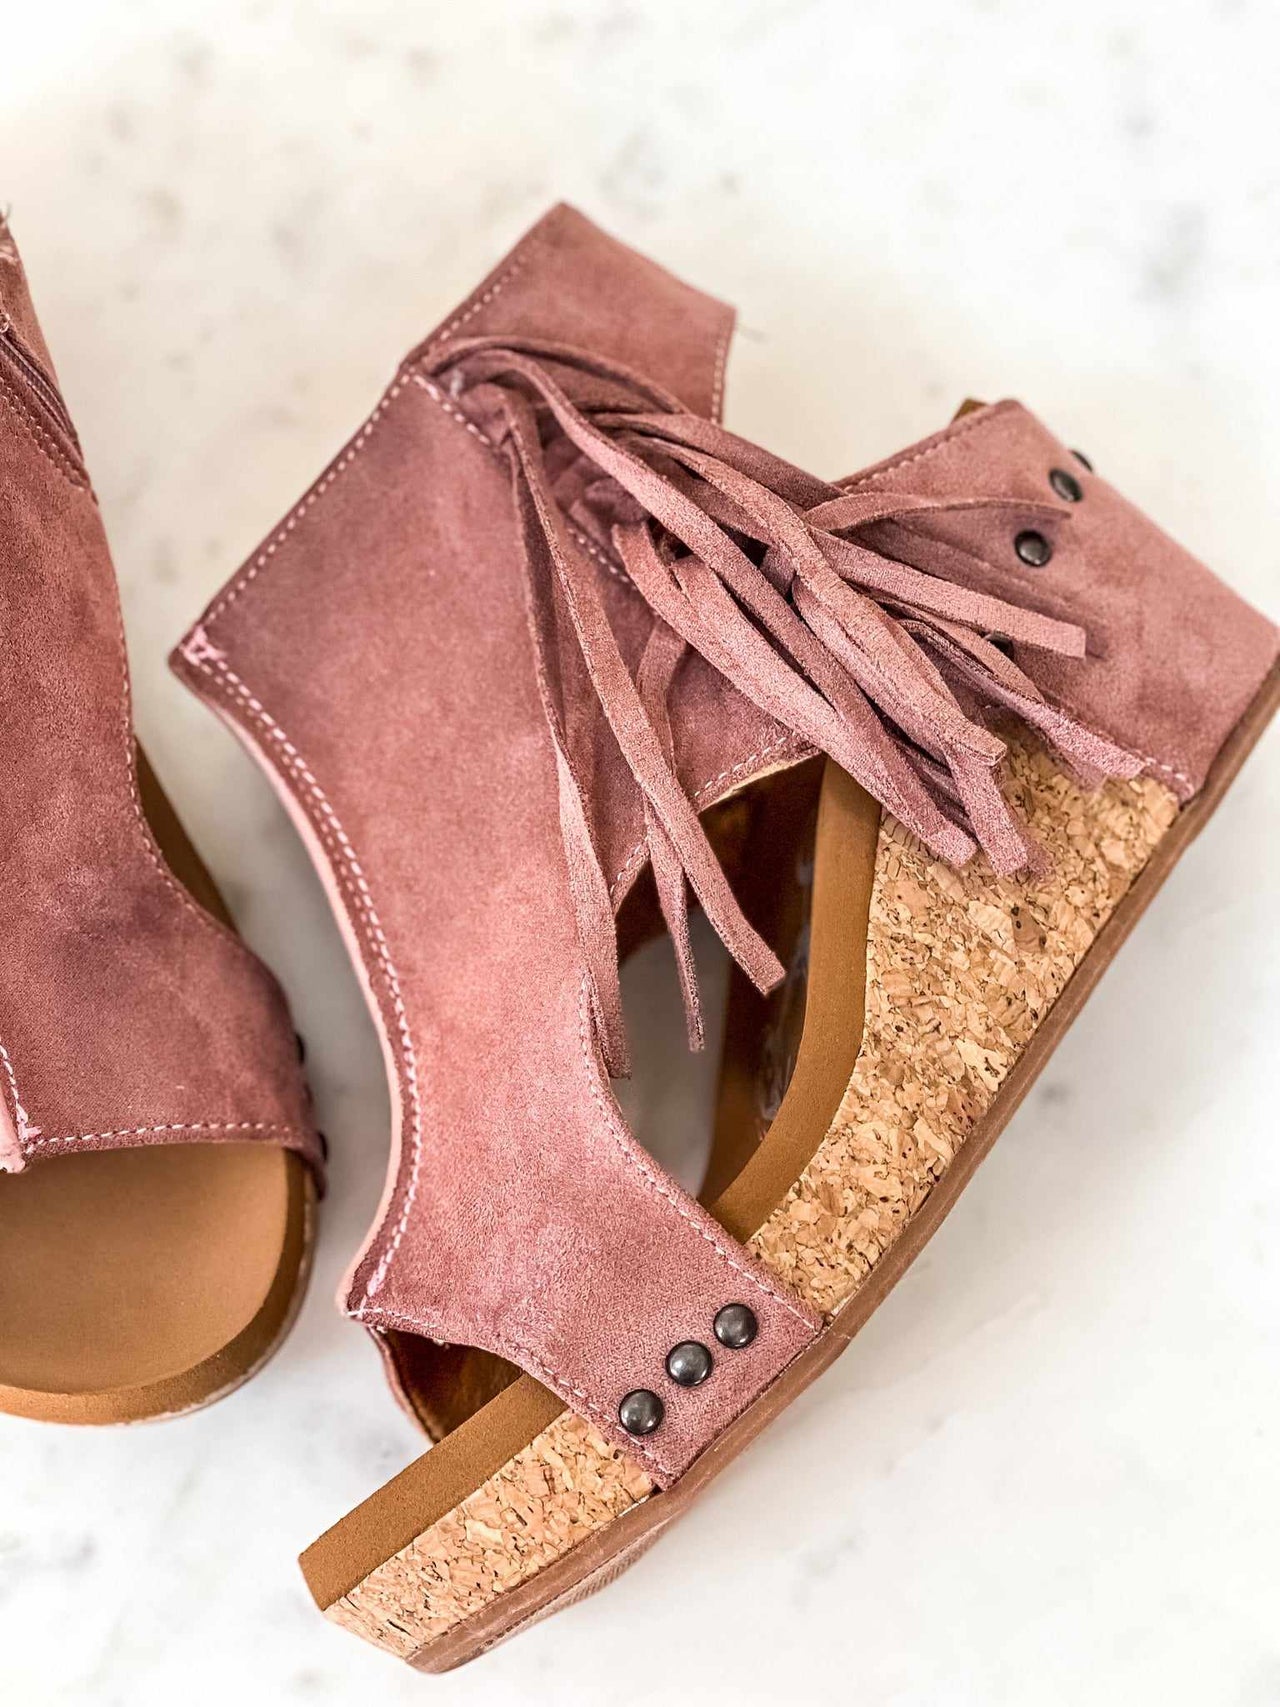 Blush pink suede wedge sandals with fringe.